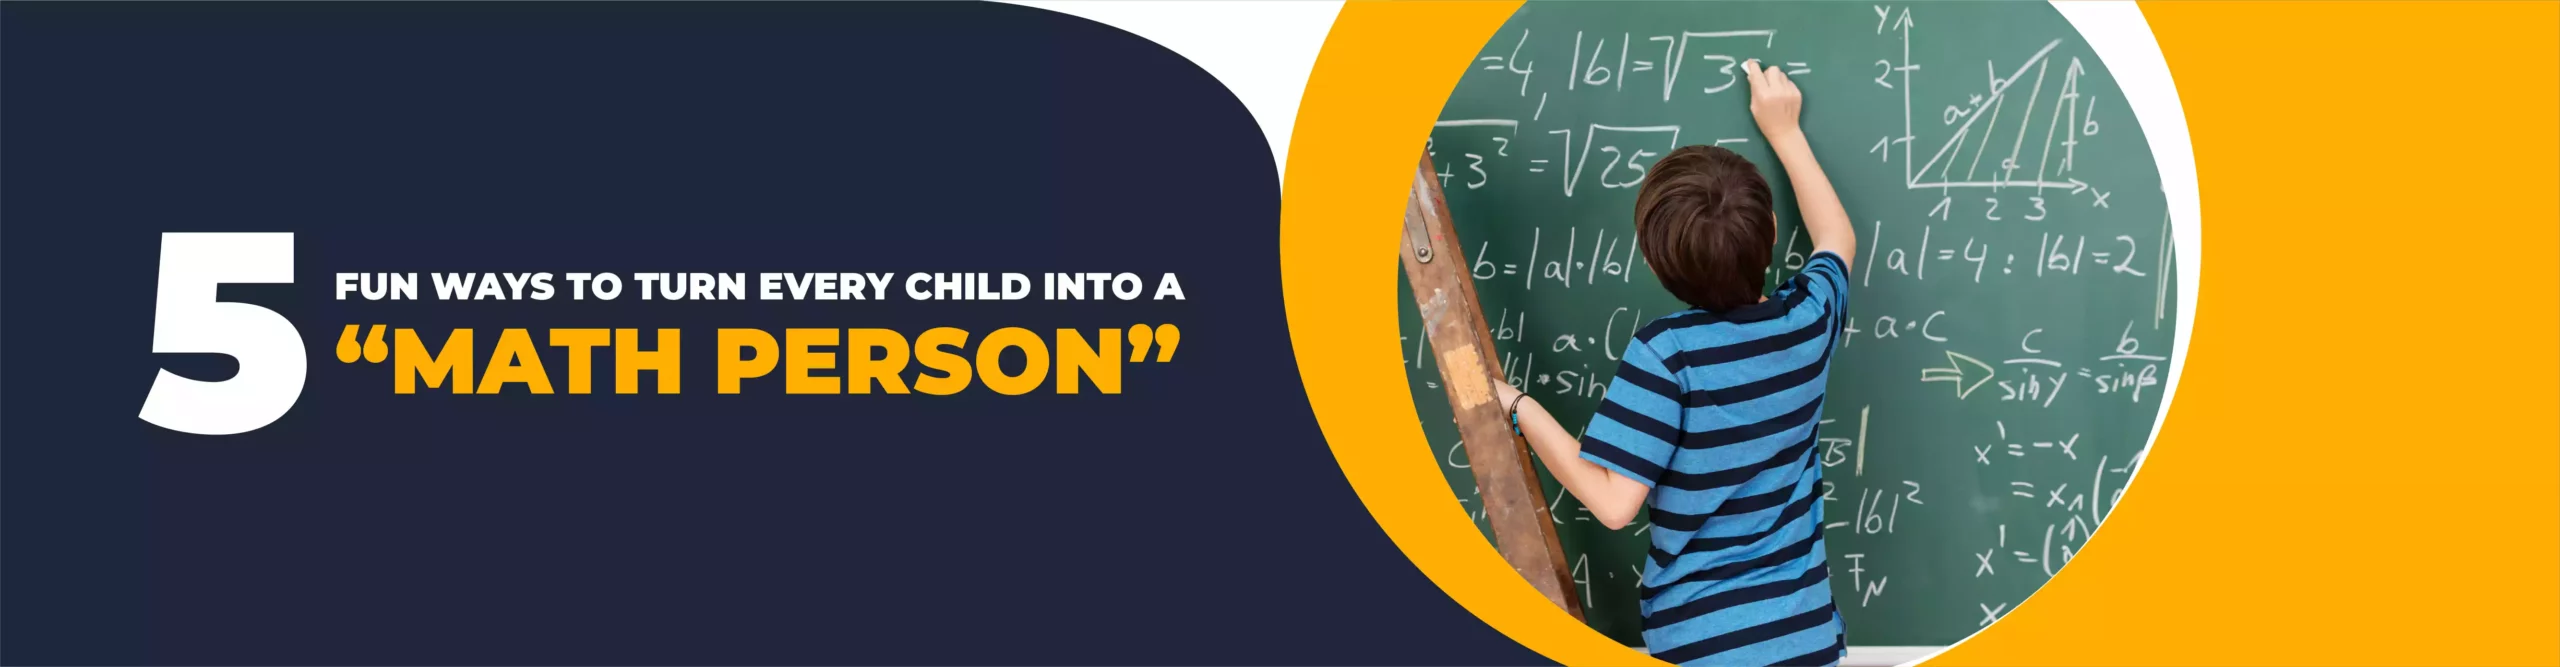 5 ways to turn your child into a math person